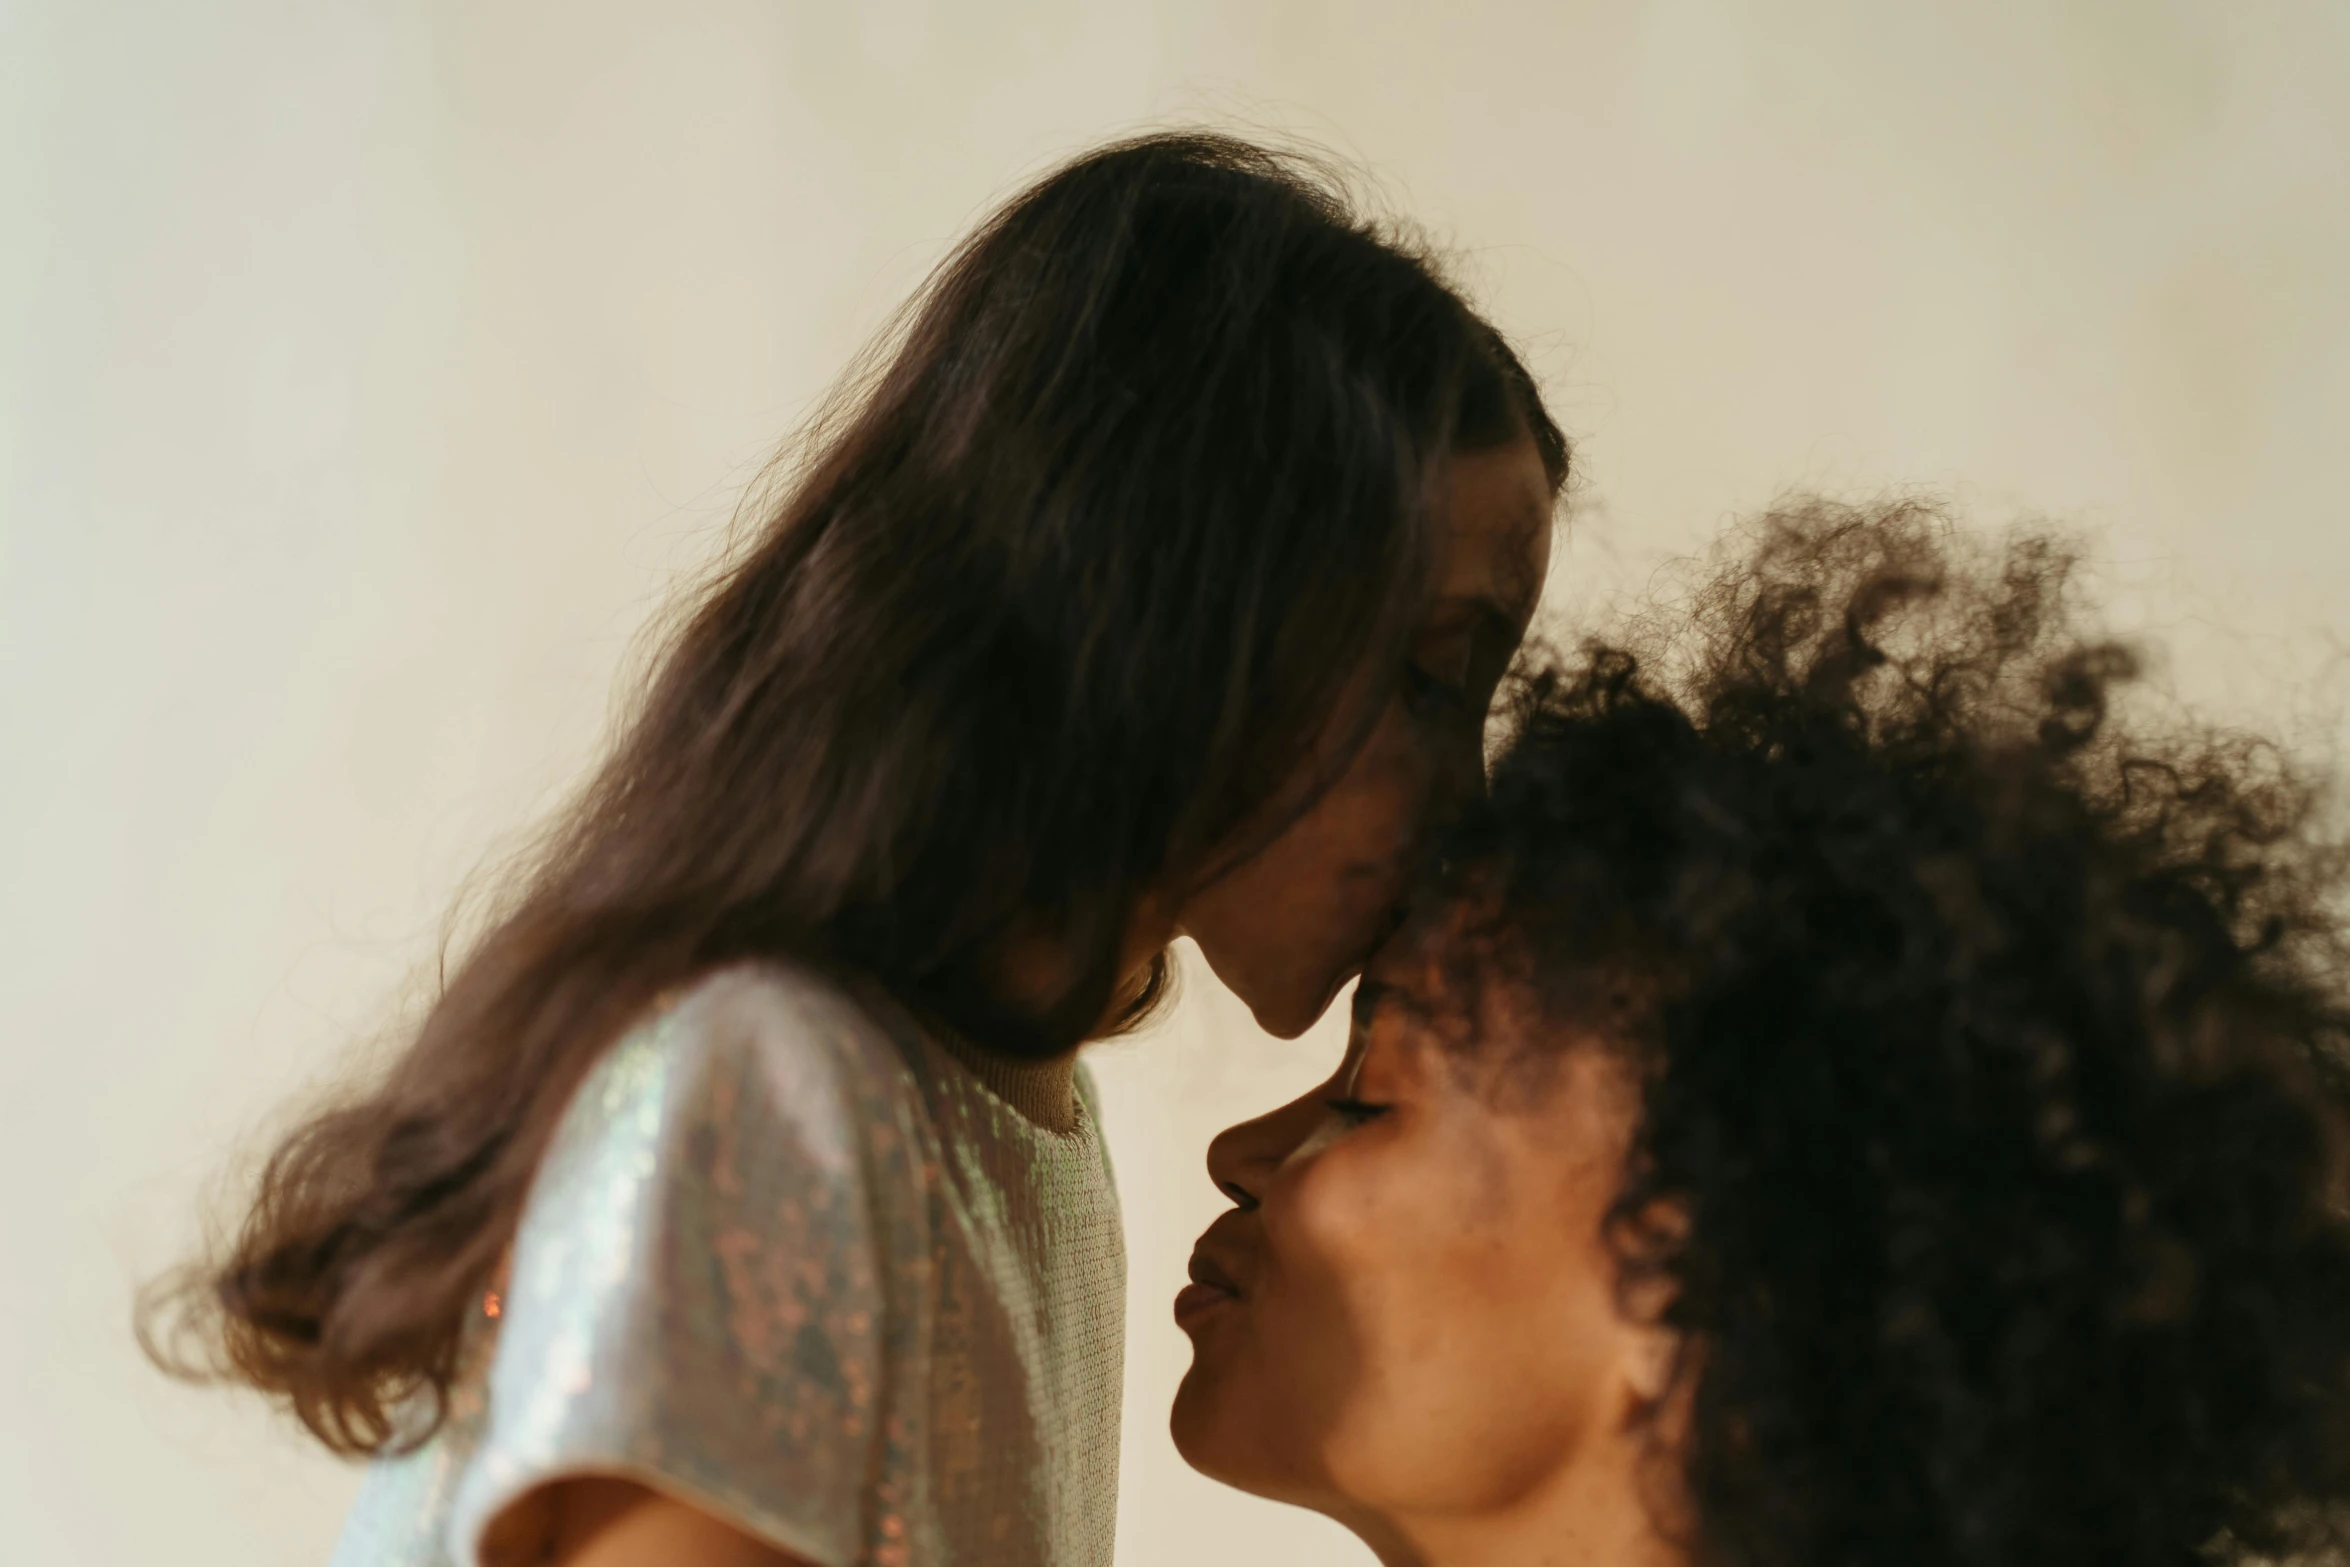 a woman and a little girl standing next to each other, pexels contest winner, romanticism, lesbian kiss, long afro hair, slightly pixelated, bedhead